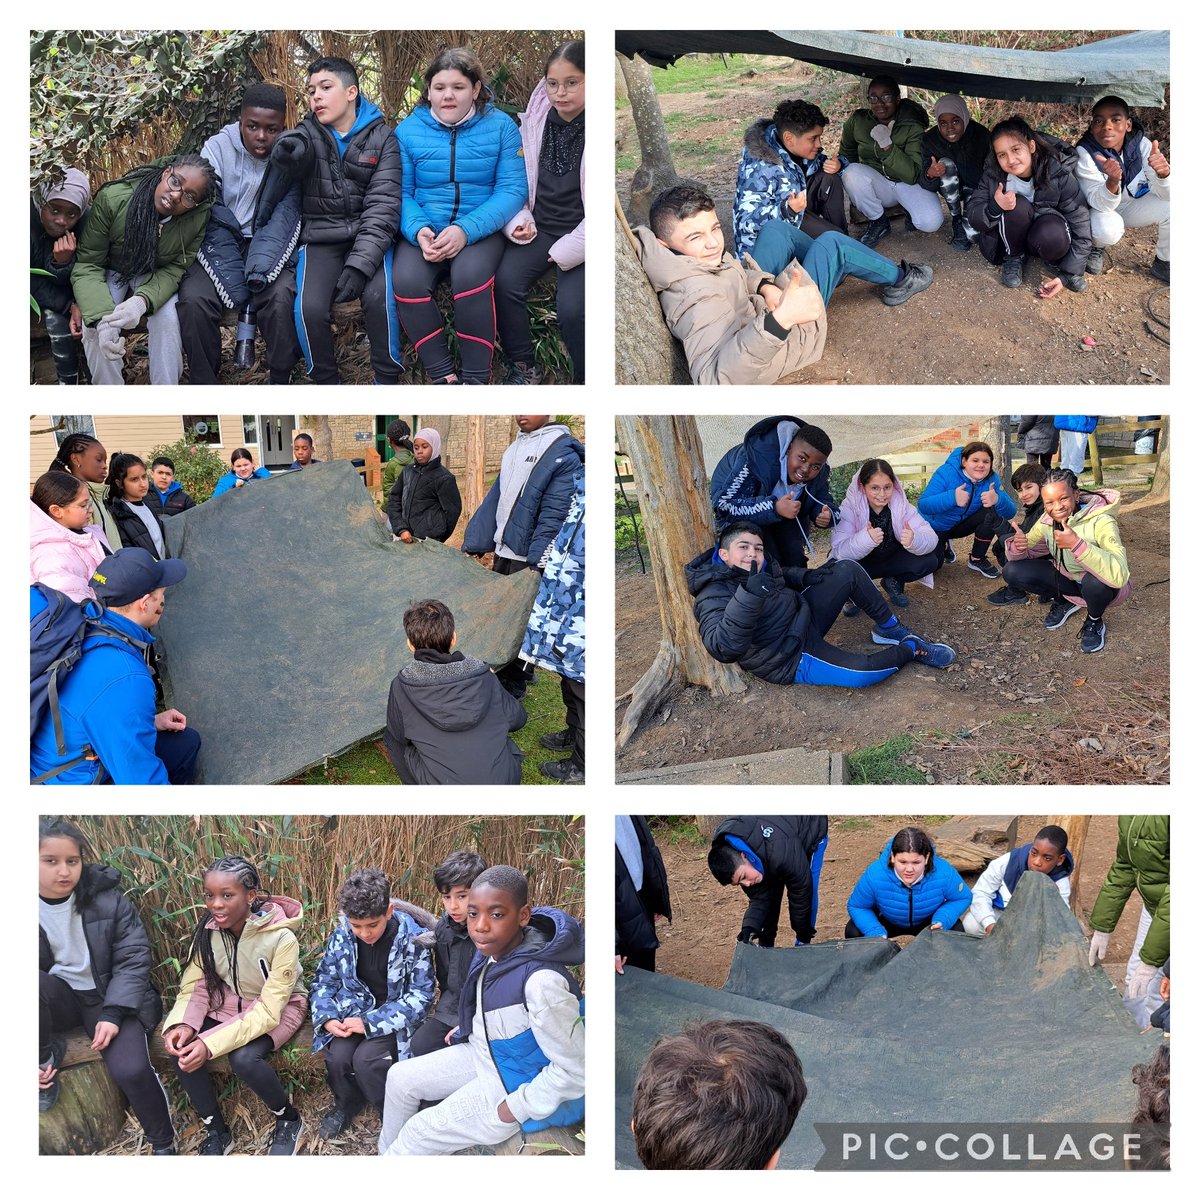 We are survivors during our session we learned how to work as a team through listening and sharing ideas. We also learned that the zombie's wear Blue @PGLTravel 😃 another great activity @woodberrydownN4